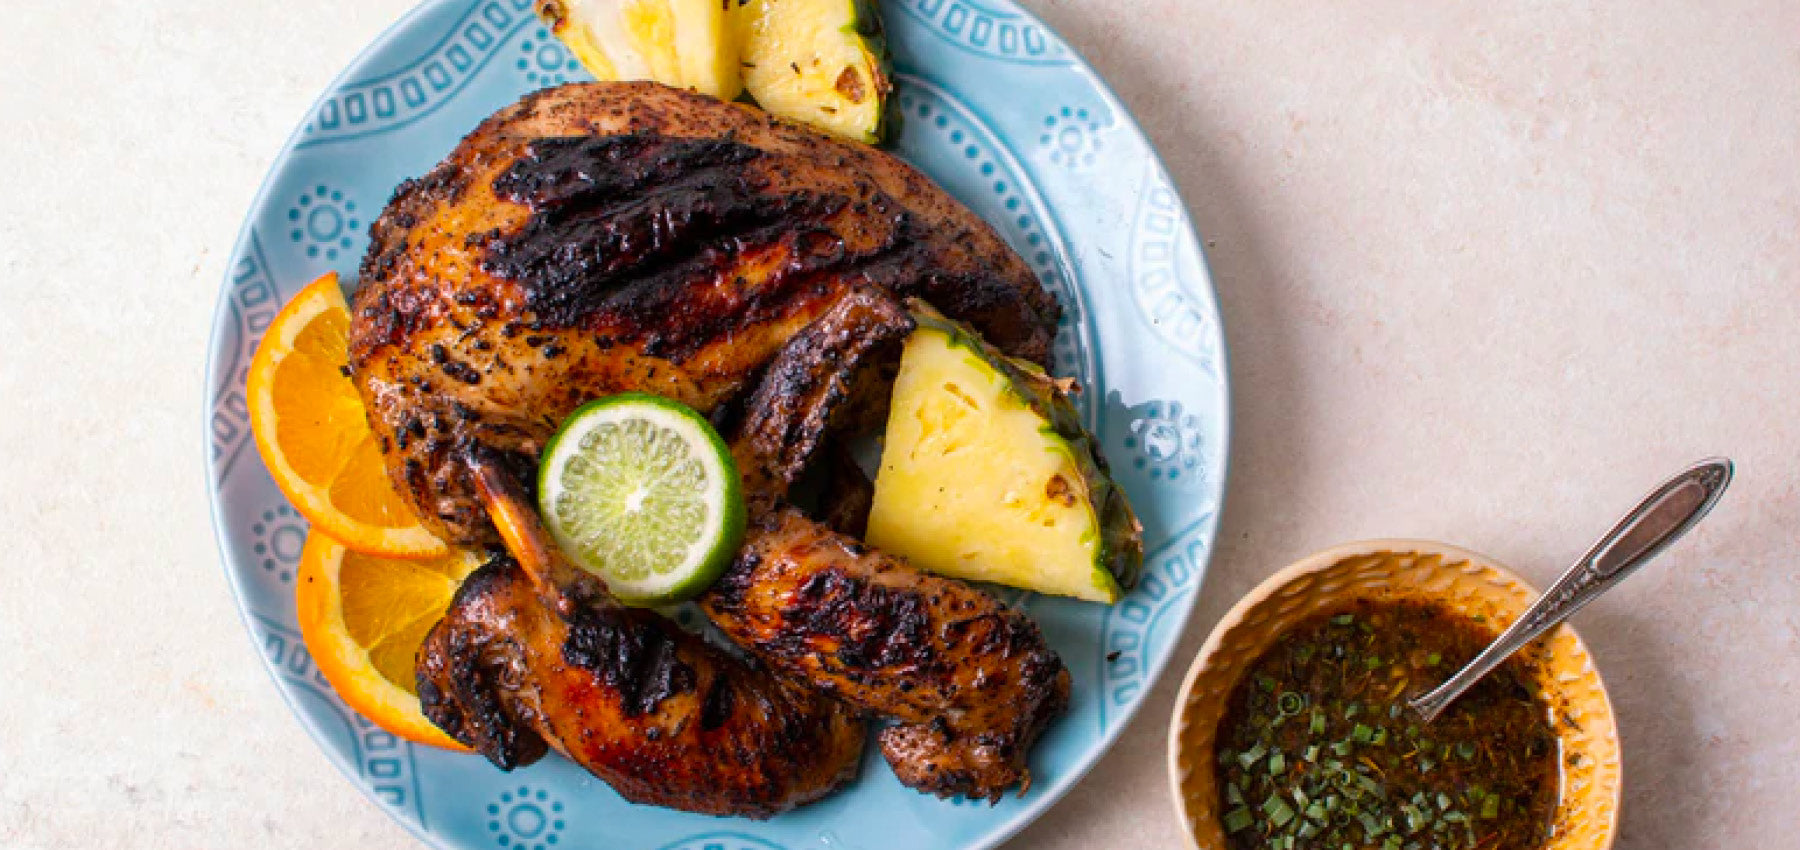 Grilled jerk chicken on plate with fruit garnishes